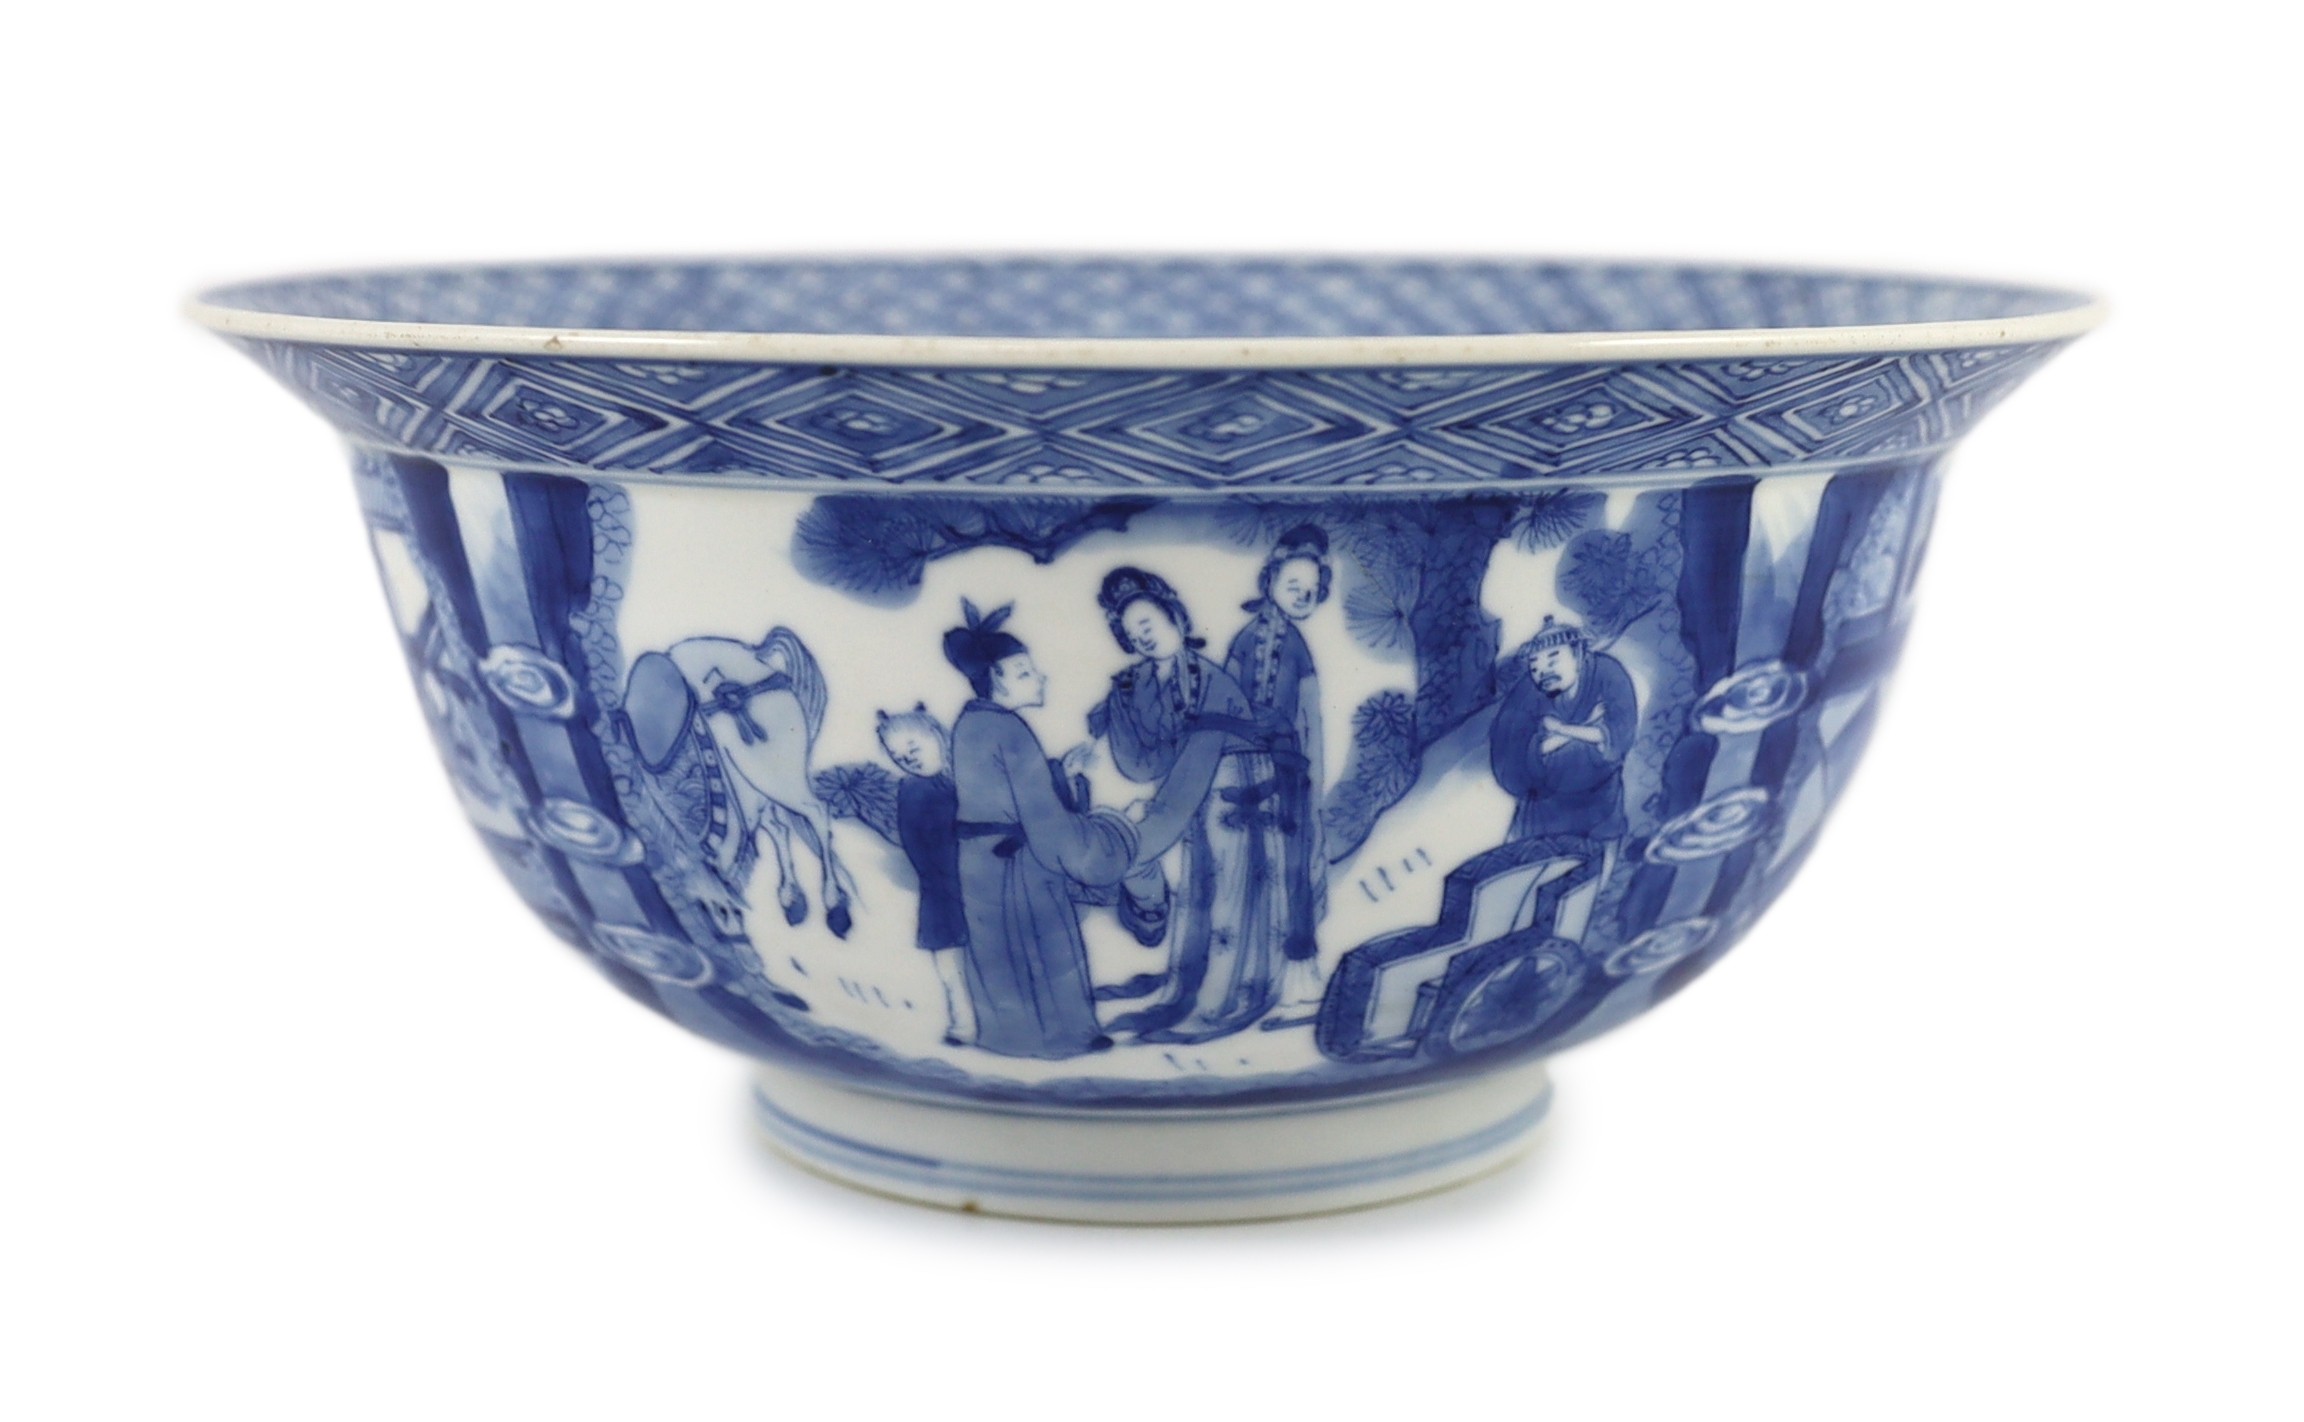 A fine Chinese blue and white ‘Xi Xiang Ji’ bowl, Kangxi six character mark and of the period (1662-1722) 19.9cm diameter, wood stand